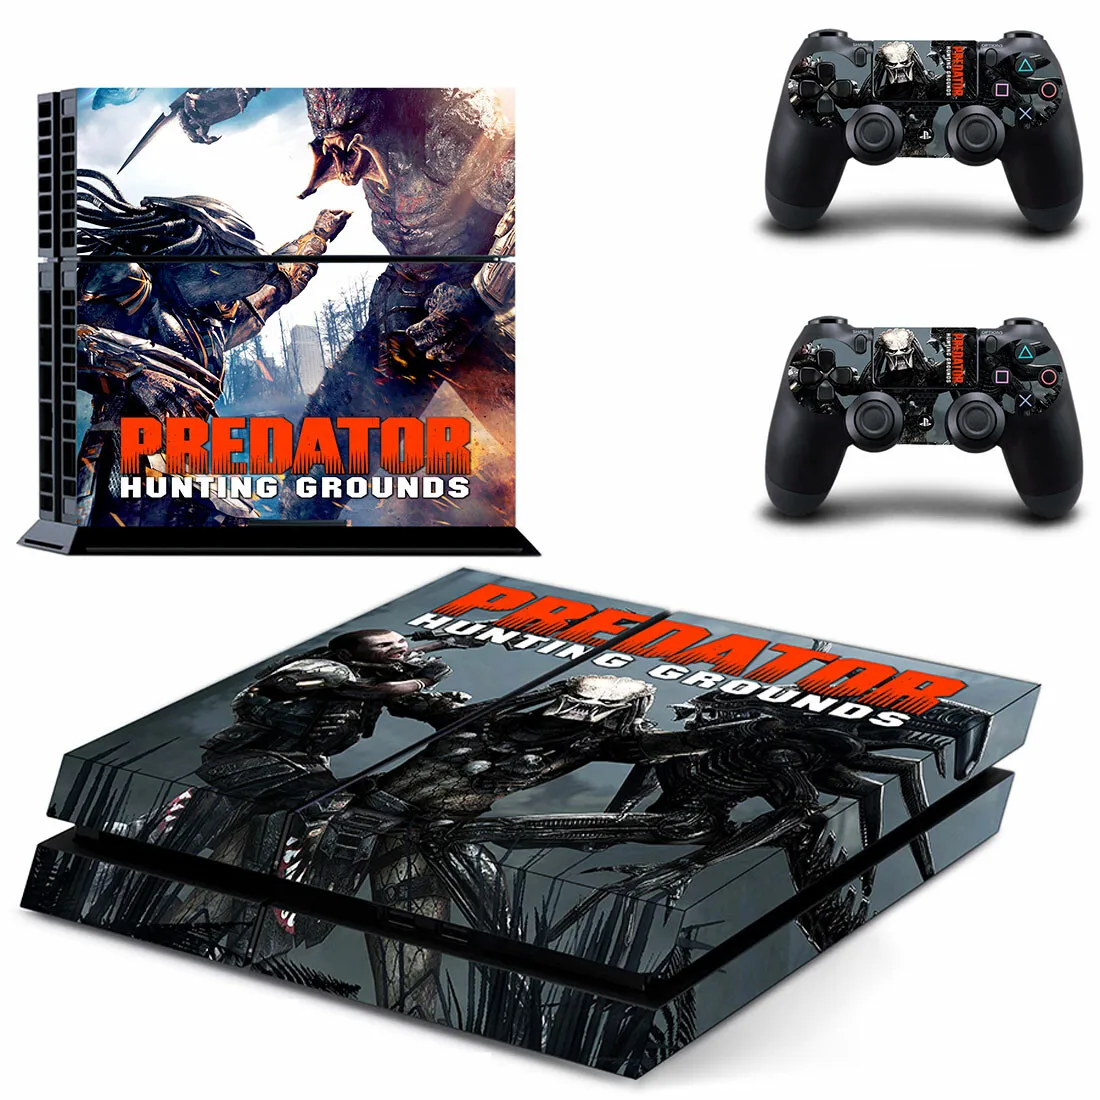 Predator PS4 Stickers Play station 4 Skin Sticker Decals Cover For PlayStation 4 PS4 Console & Controller Skins Vinyl